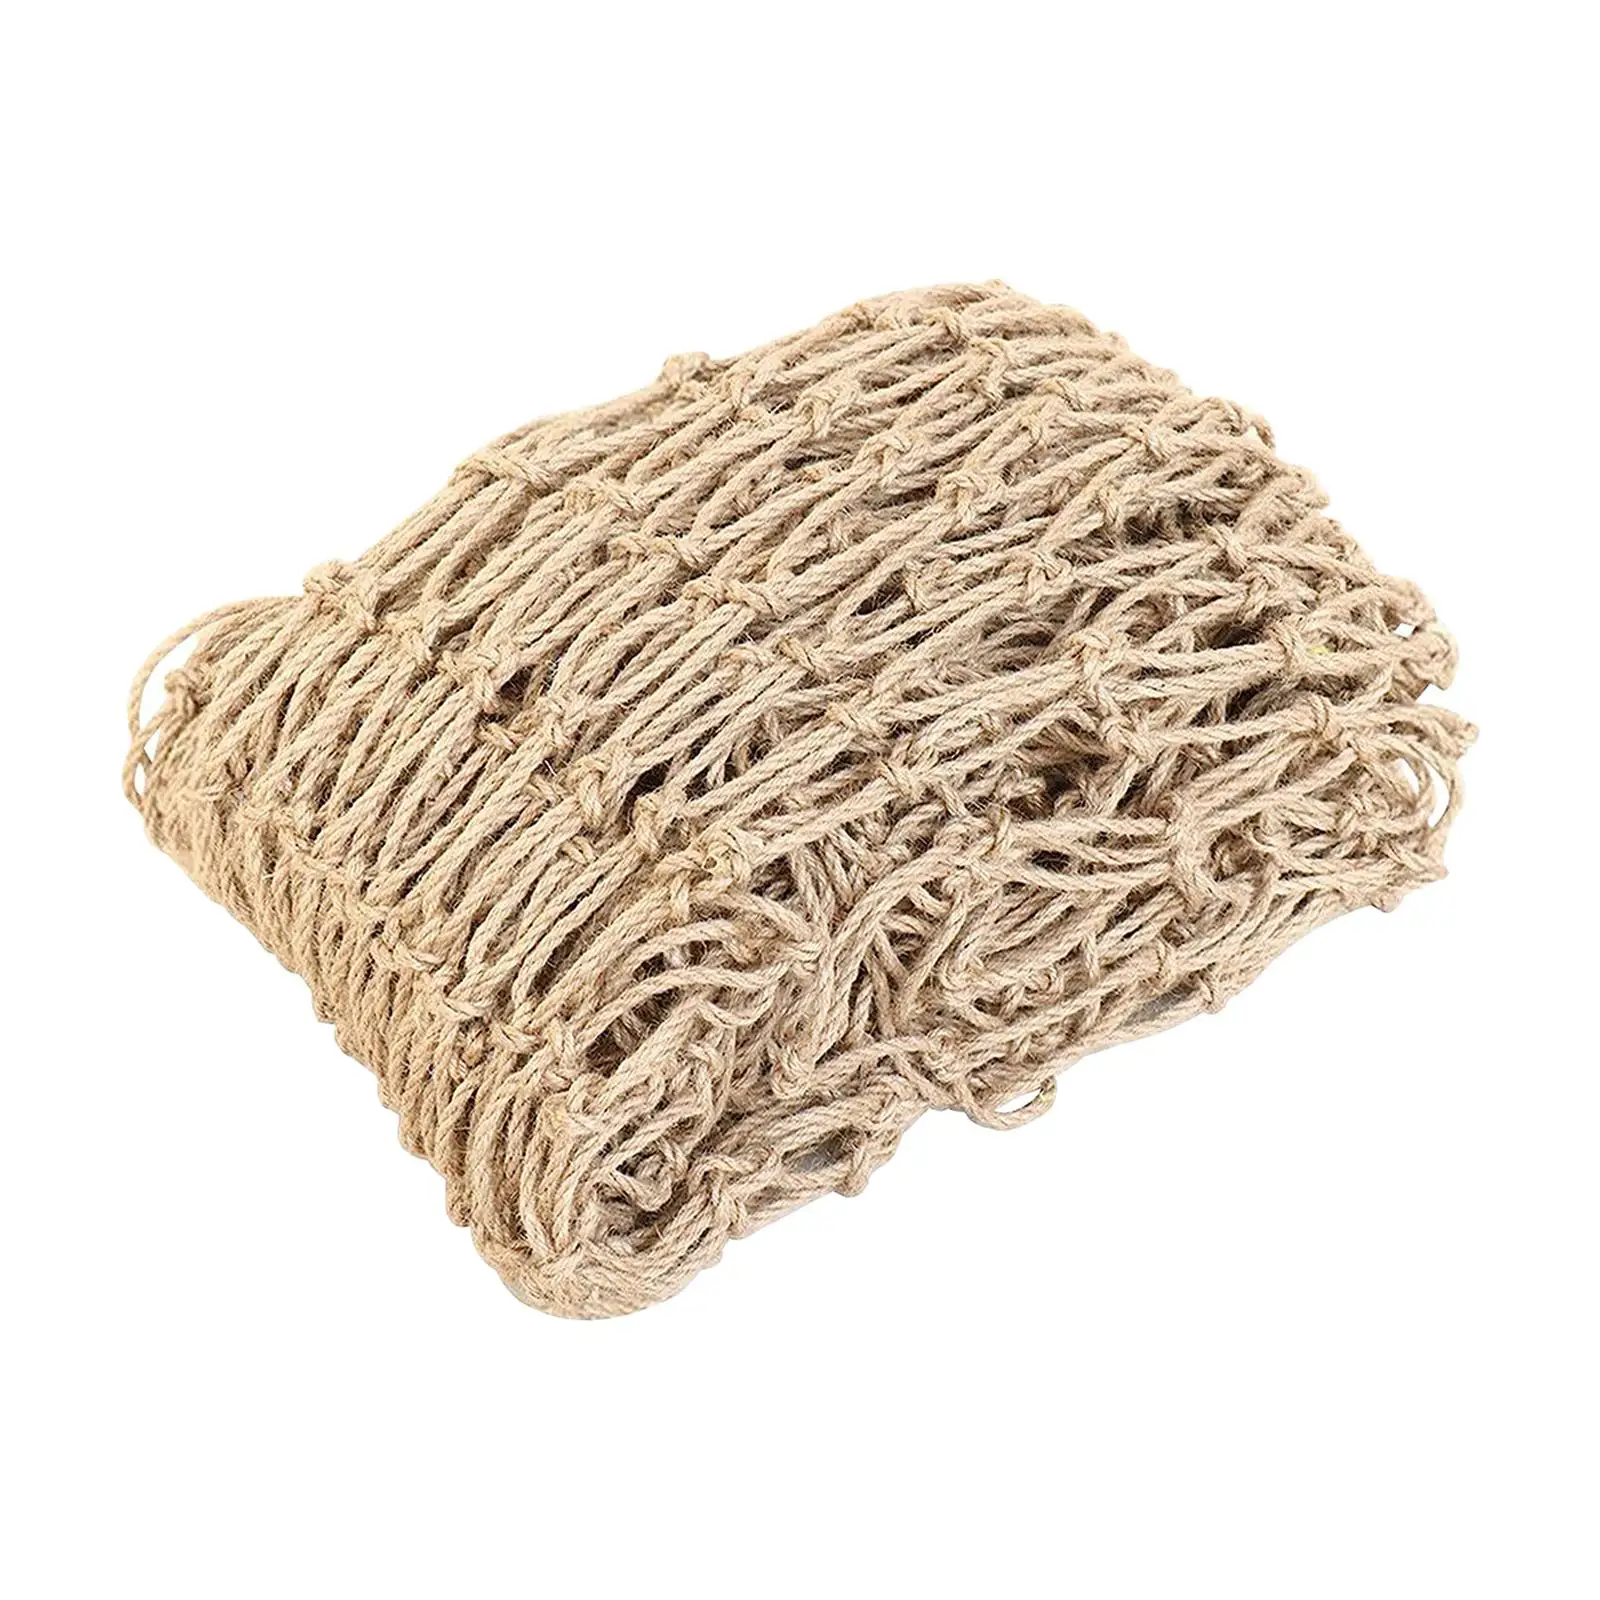 Trellis Twine Save Space 1M Heavy Duty Portable Multipurpose Plant Netting Garden Netting for Peas Grapes Tomatoes Beans Outdoor